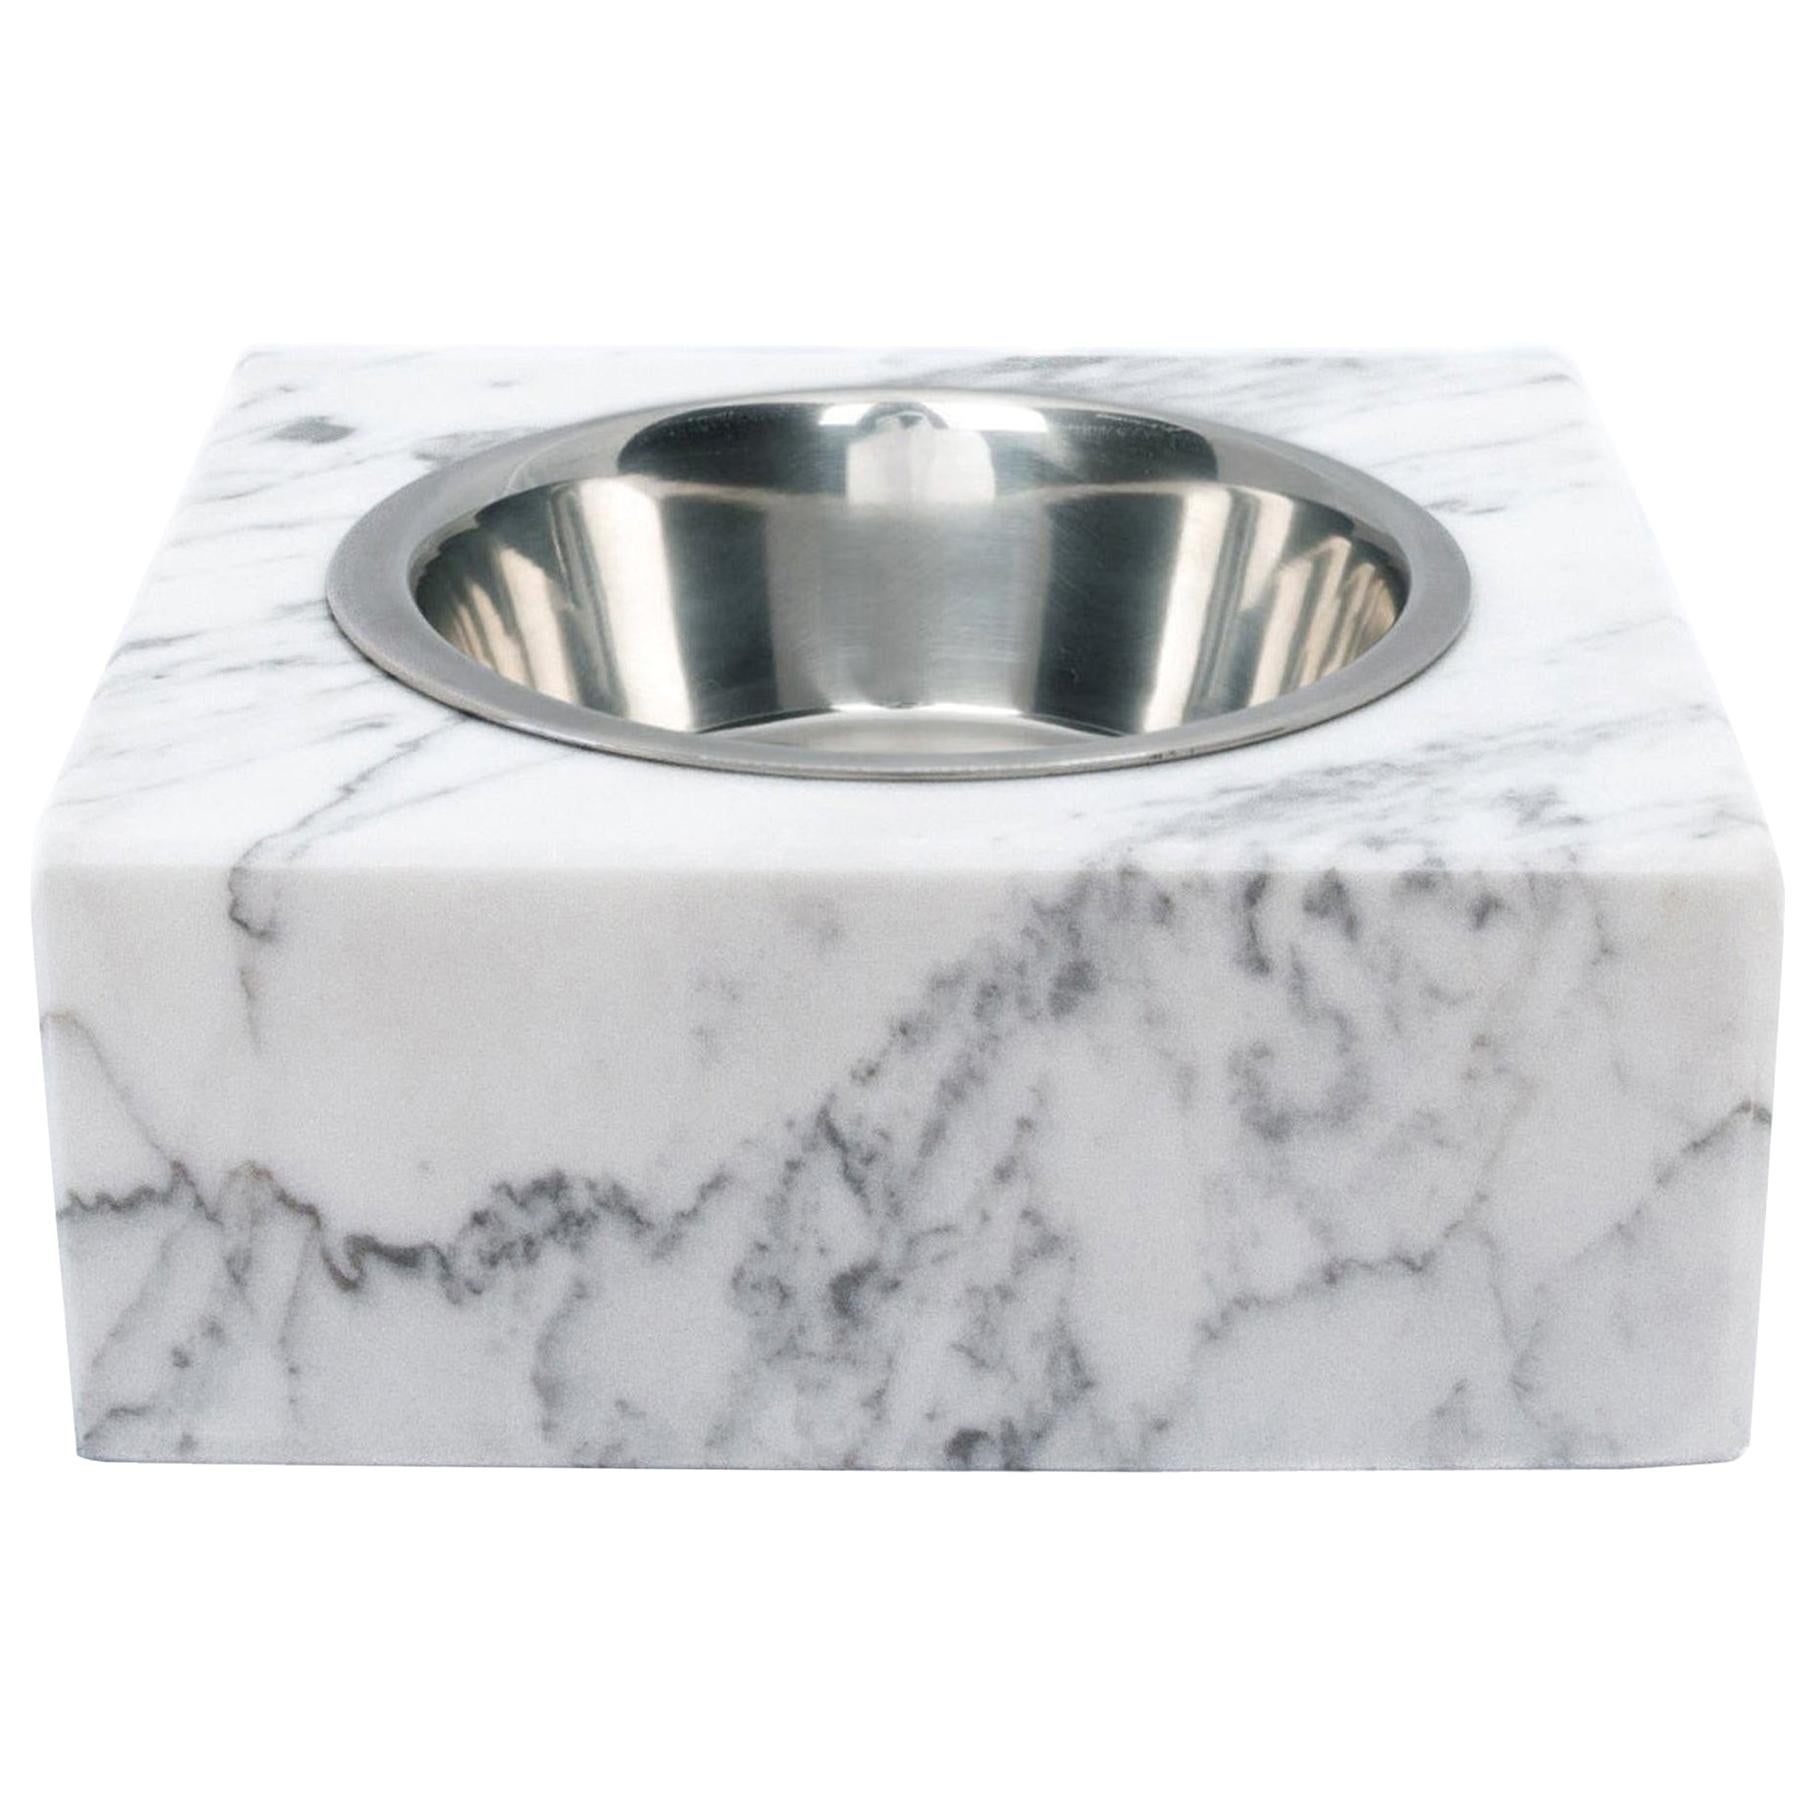 Handmade Squared White Carrara Marble Cats or Dogs Bowl with Removable Steel For Sale